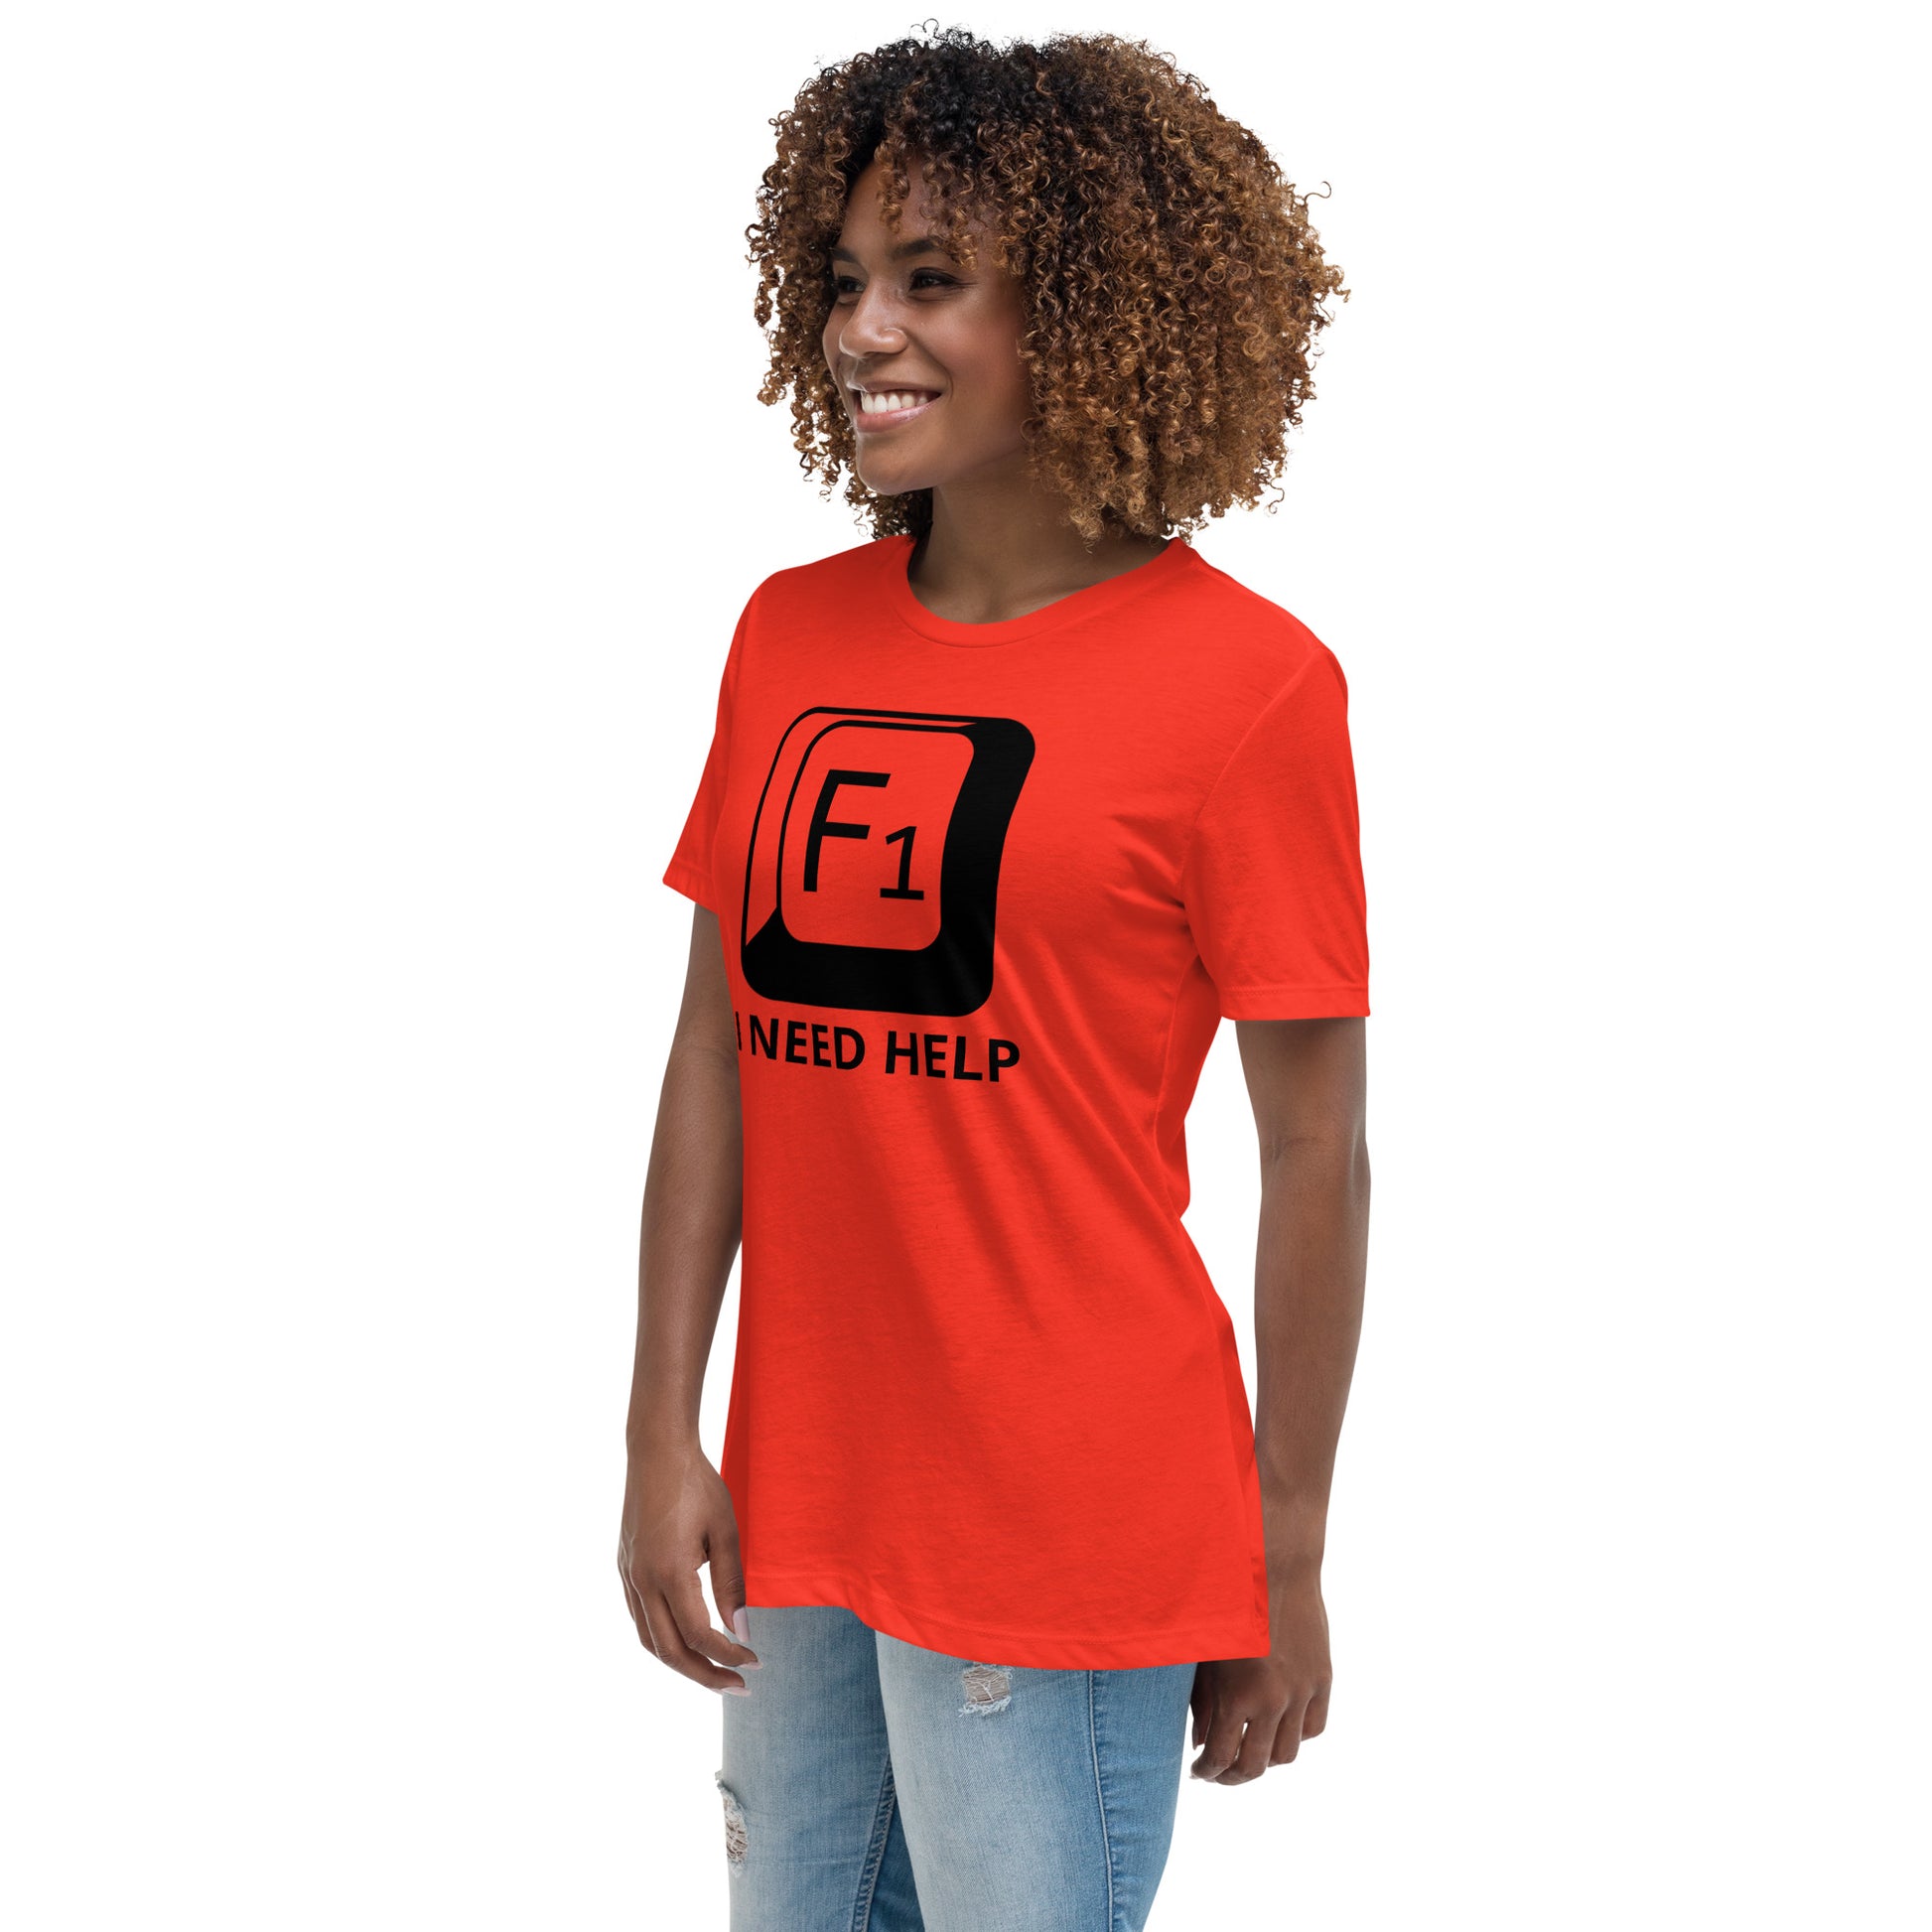 Woman with poppy t-shirt with picture of "F1" key and text "I need help"